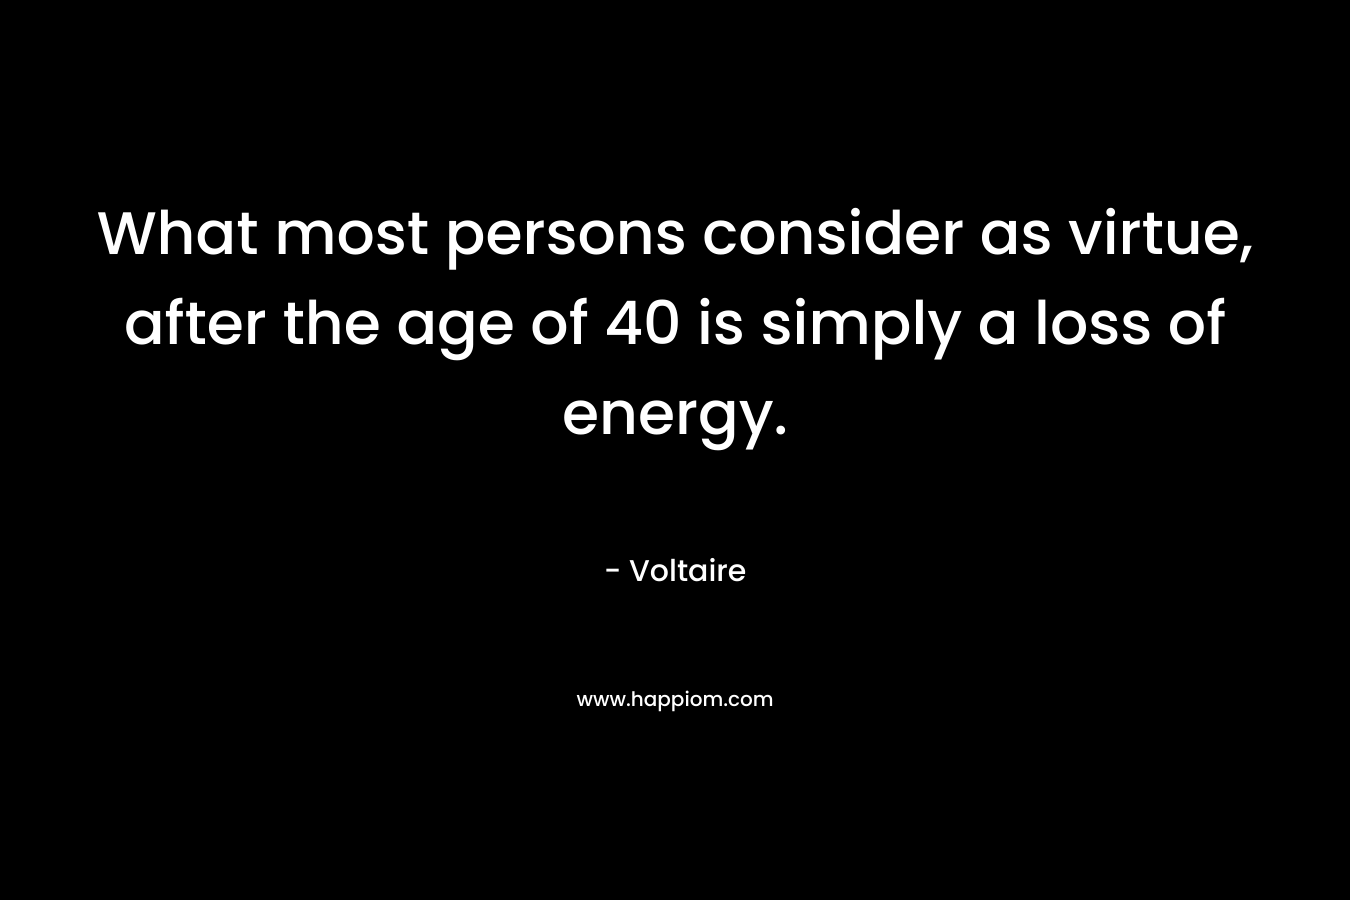 What most persons consider as virtue, after the age of 40 is simply a loss of energy. – Voltaire